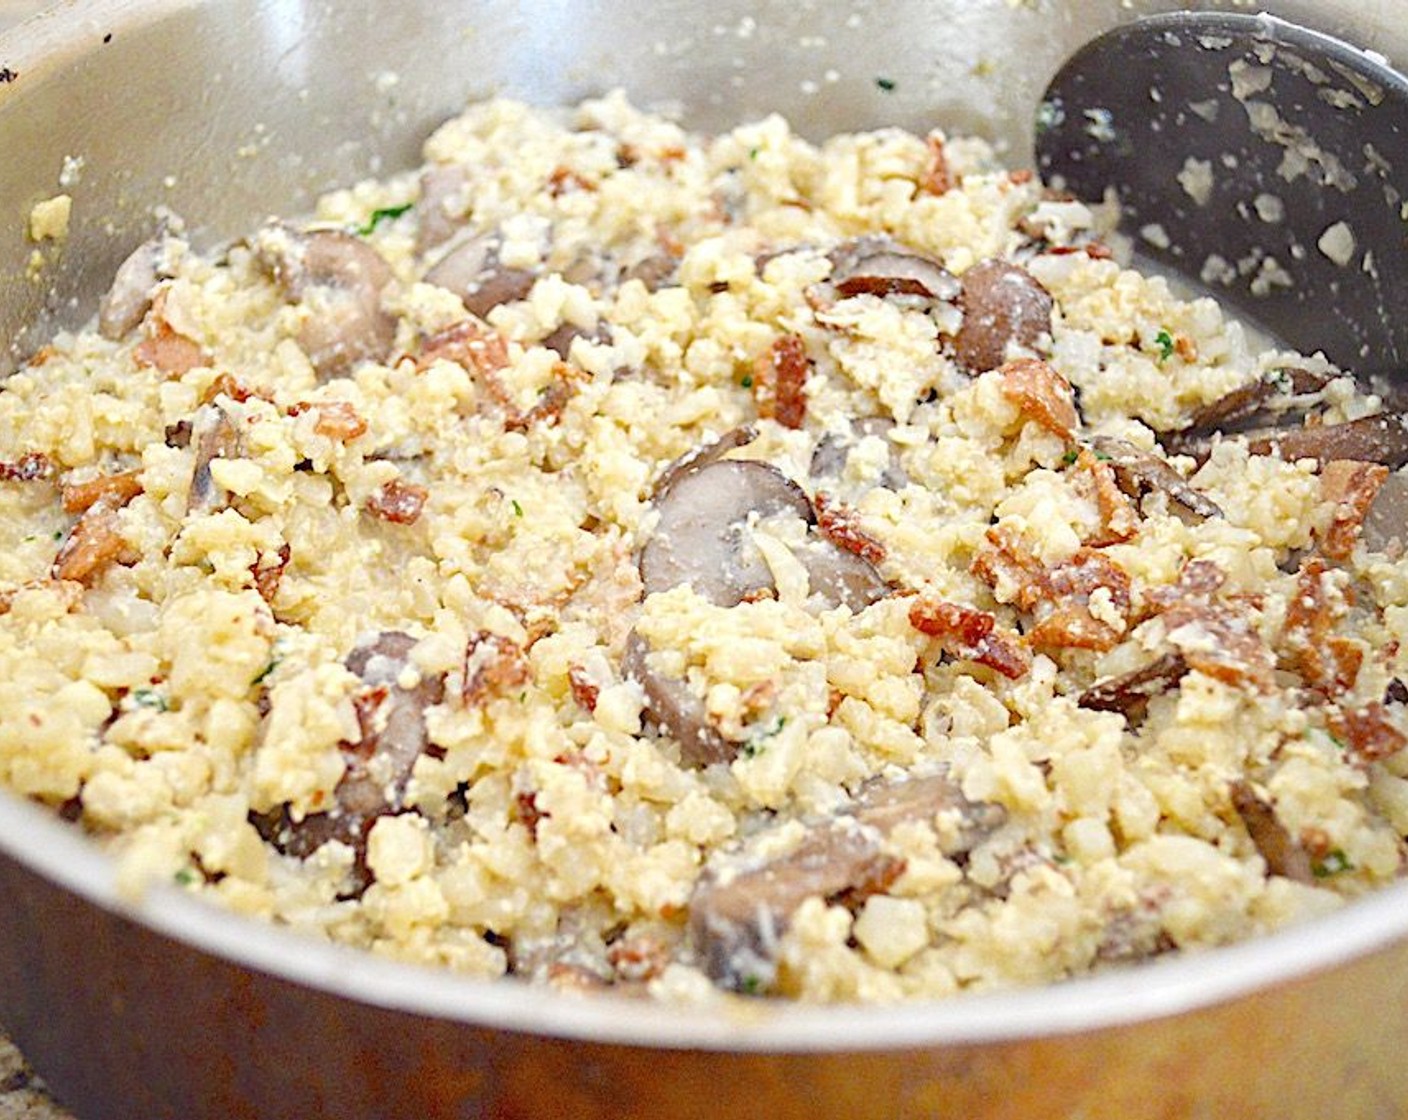 step 6 When the cauliflower rice is tender, pour in the sauce and stir continuously until the eggs cook through and the sauce is thick but not scrambled. This only takes 2-3 minutes.